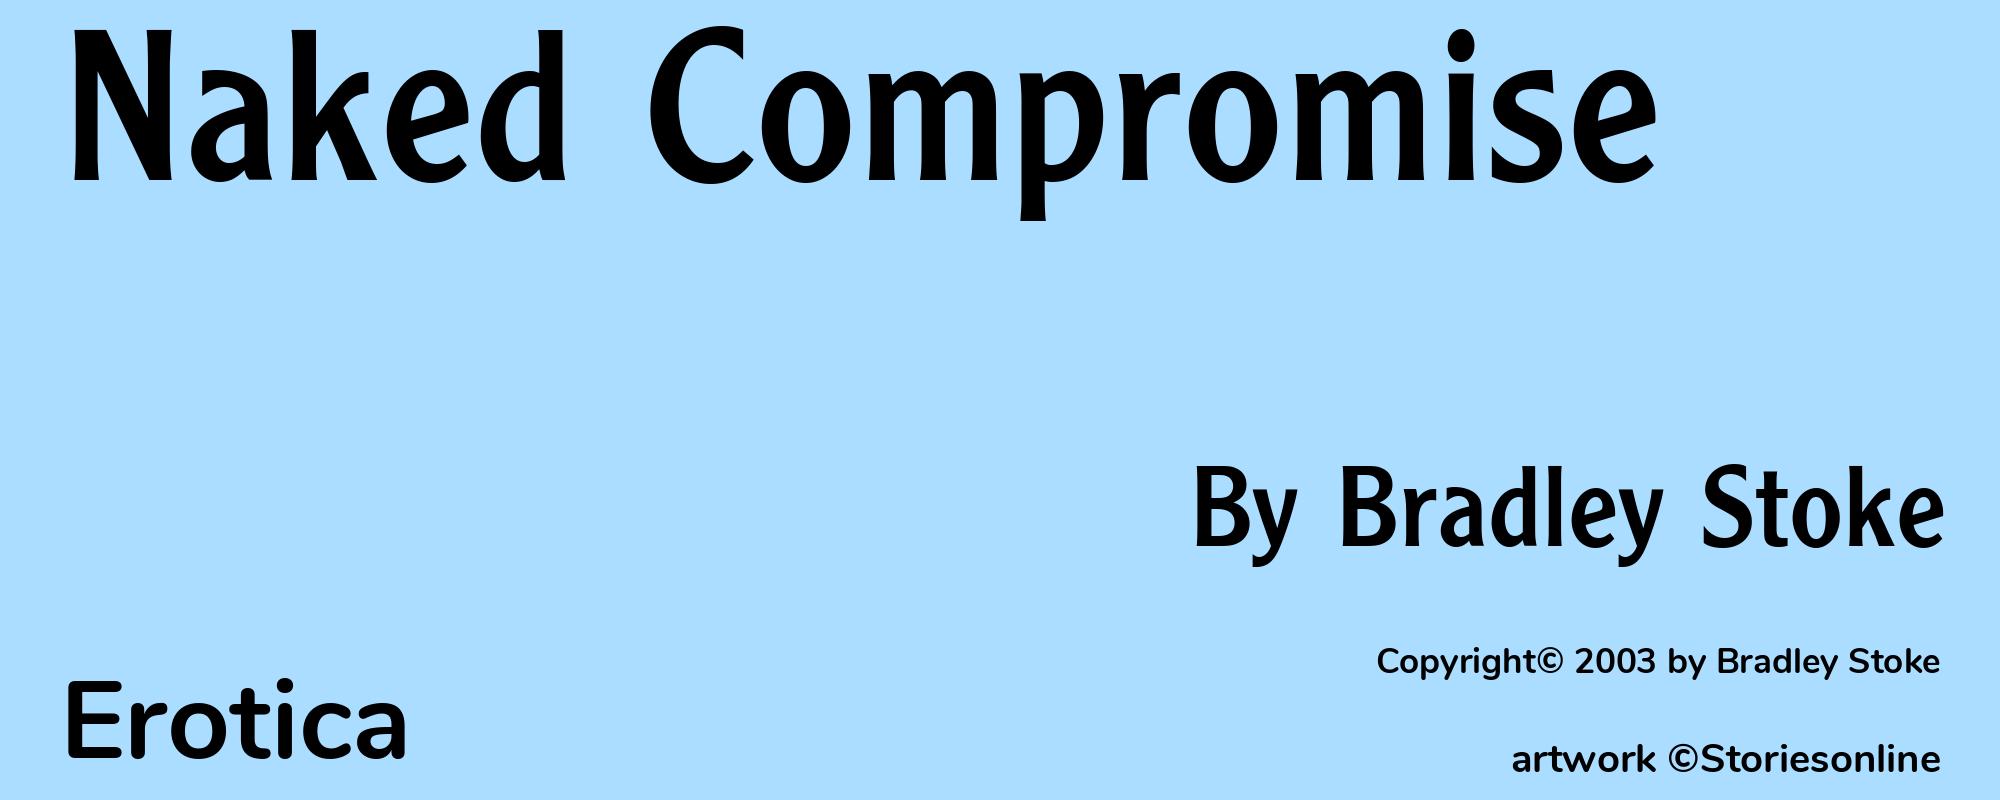 Naked Compromise - Cover